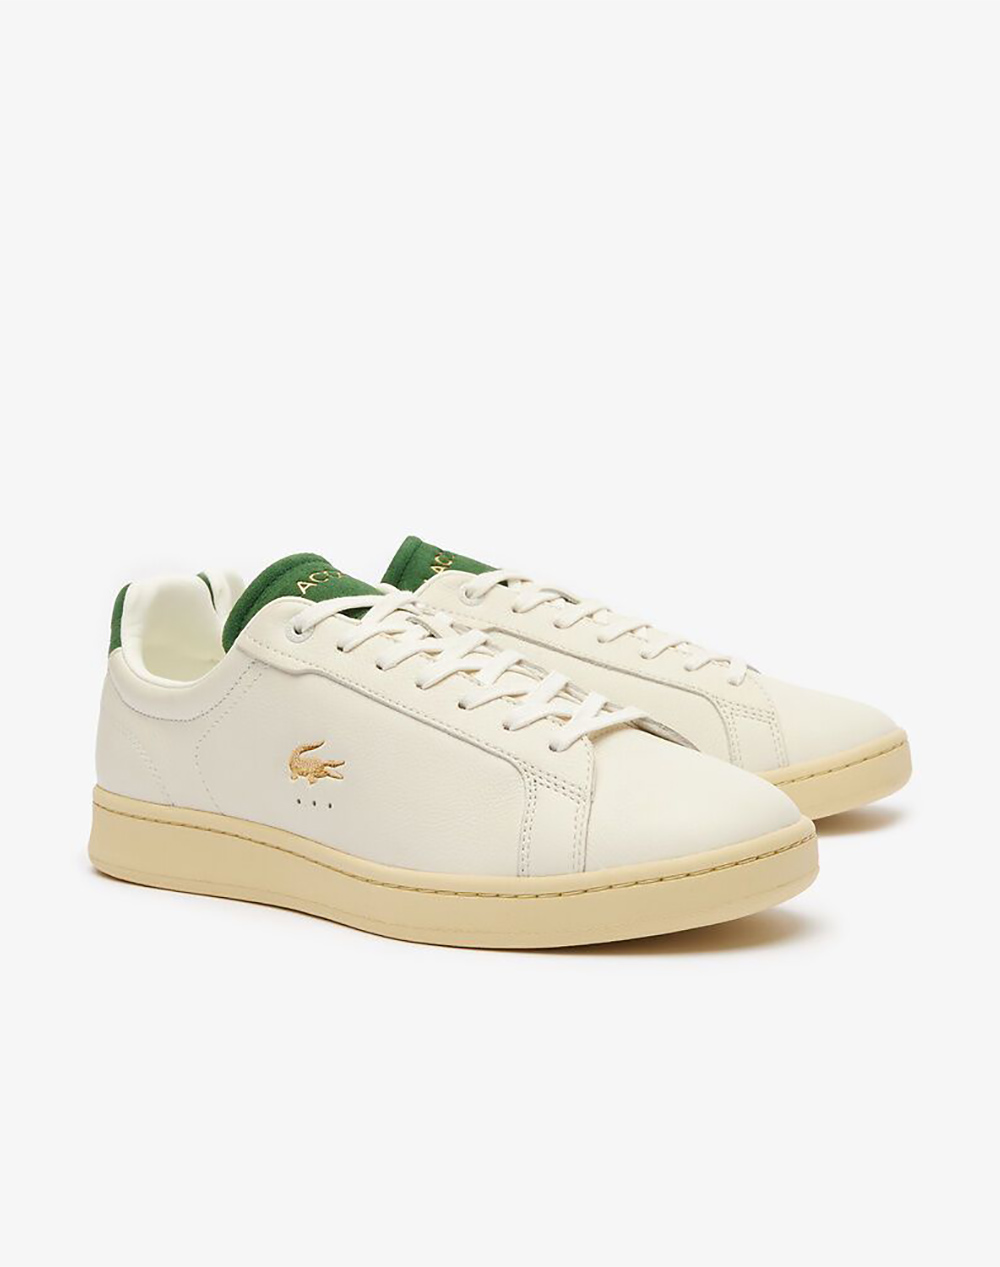 LACOSTE MENS SHOES CARNABY PRO 124 1 SMA CARNABY PRO 124 1 SMA